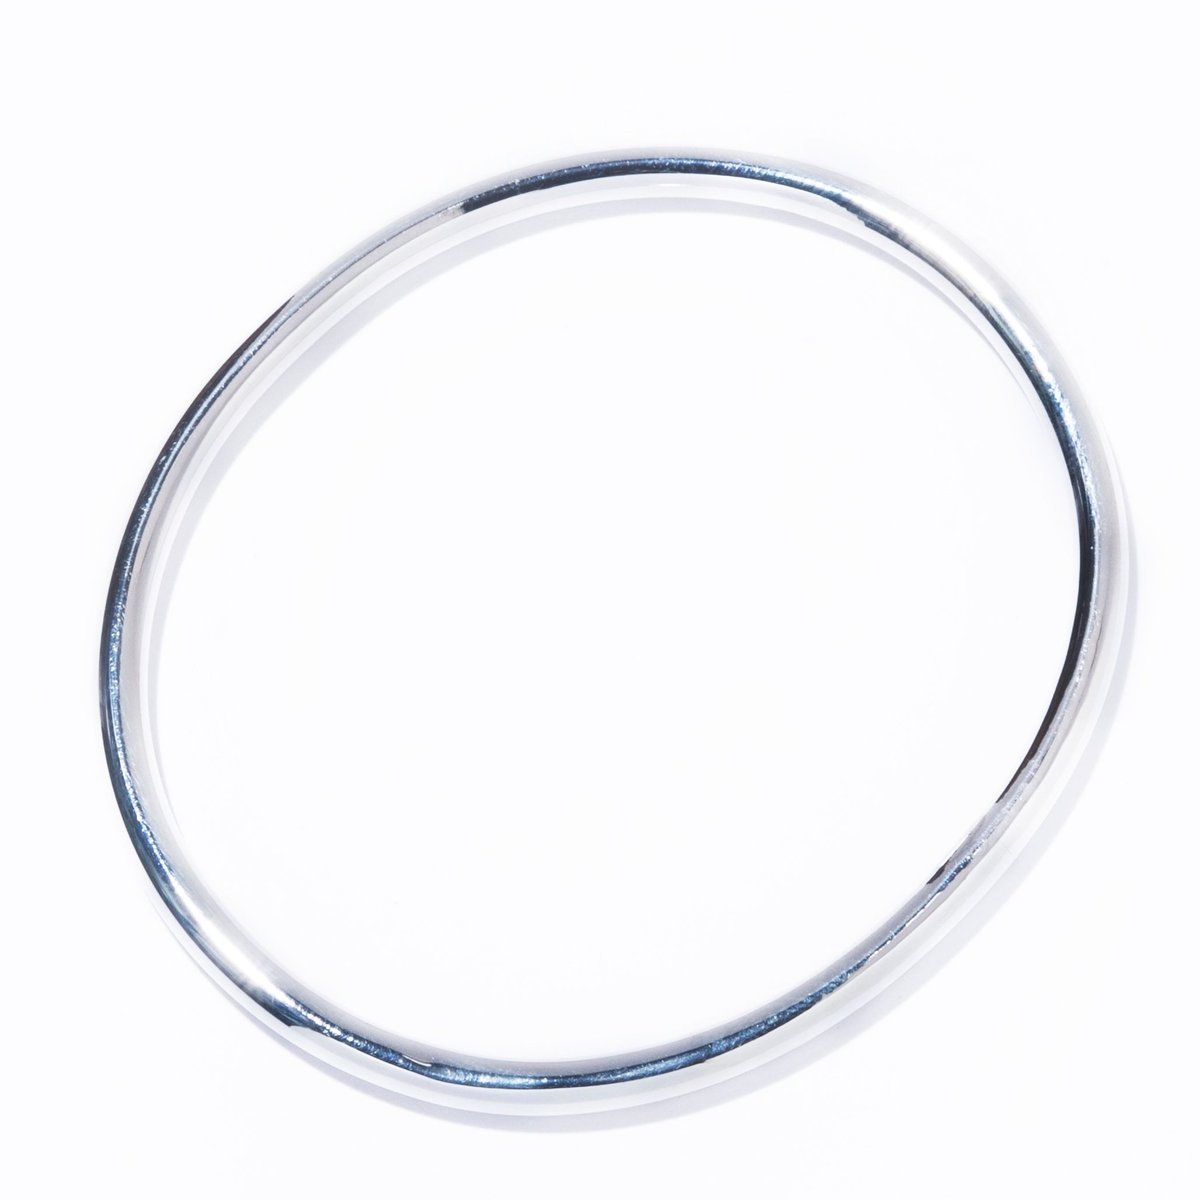 classic oval band silver | IRIS47 official onli